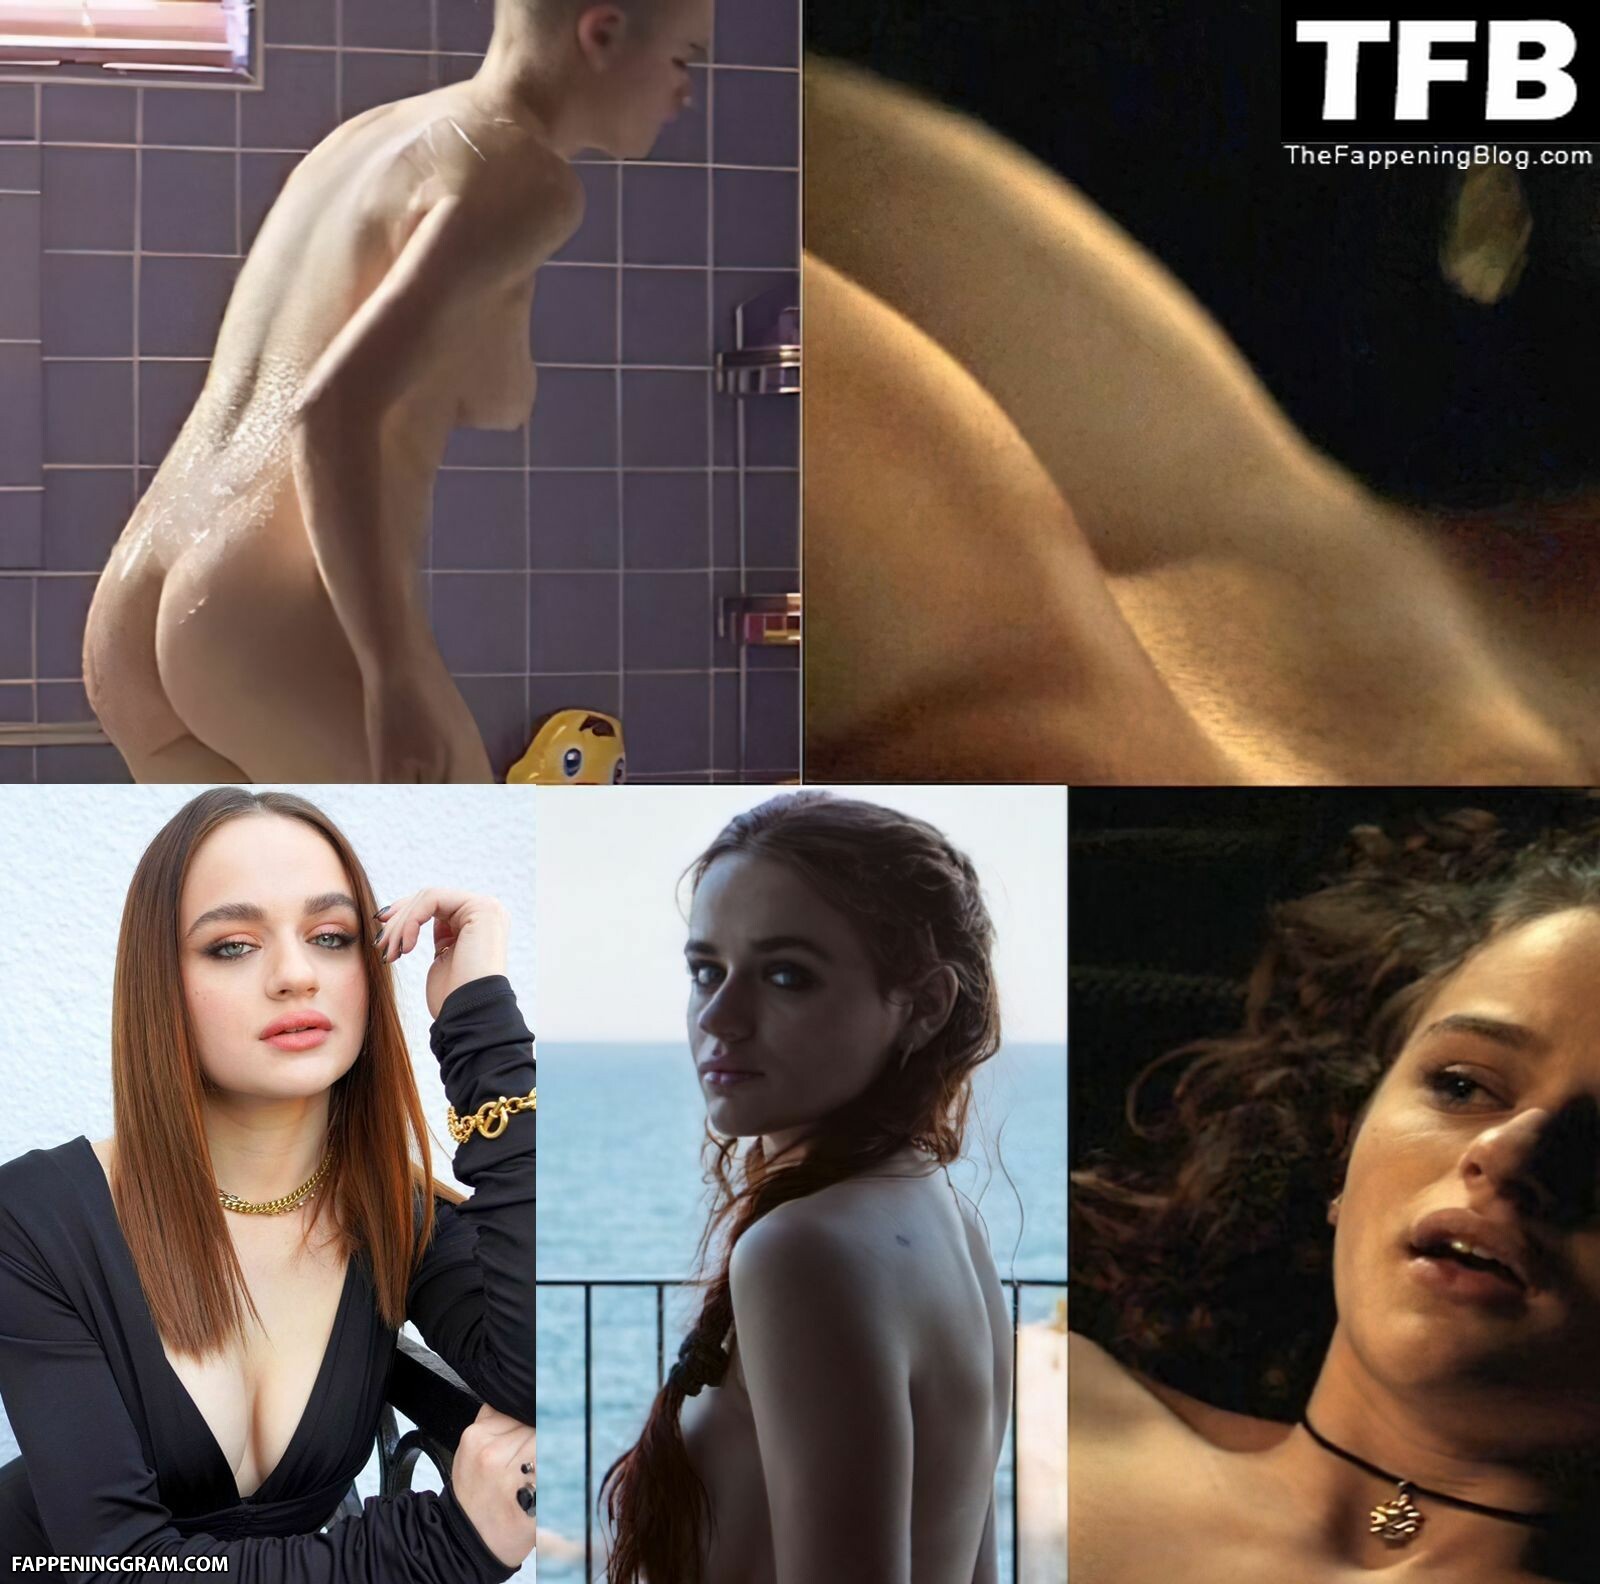 Joey King Nude The Fappening - Page 4 - FappeningGram